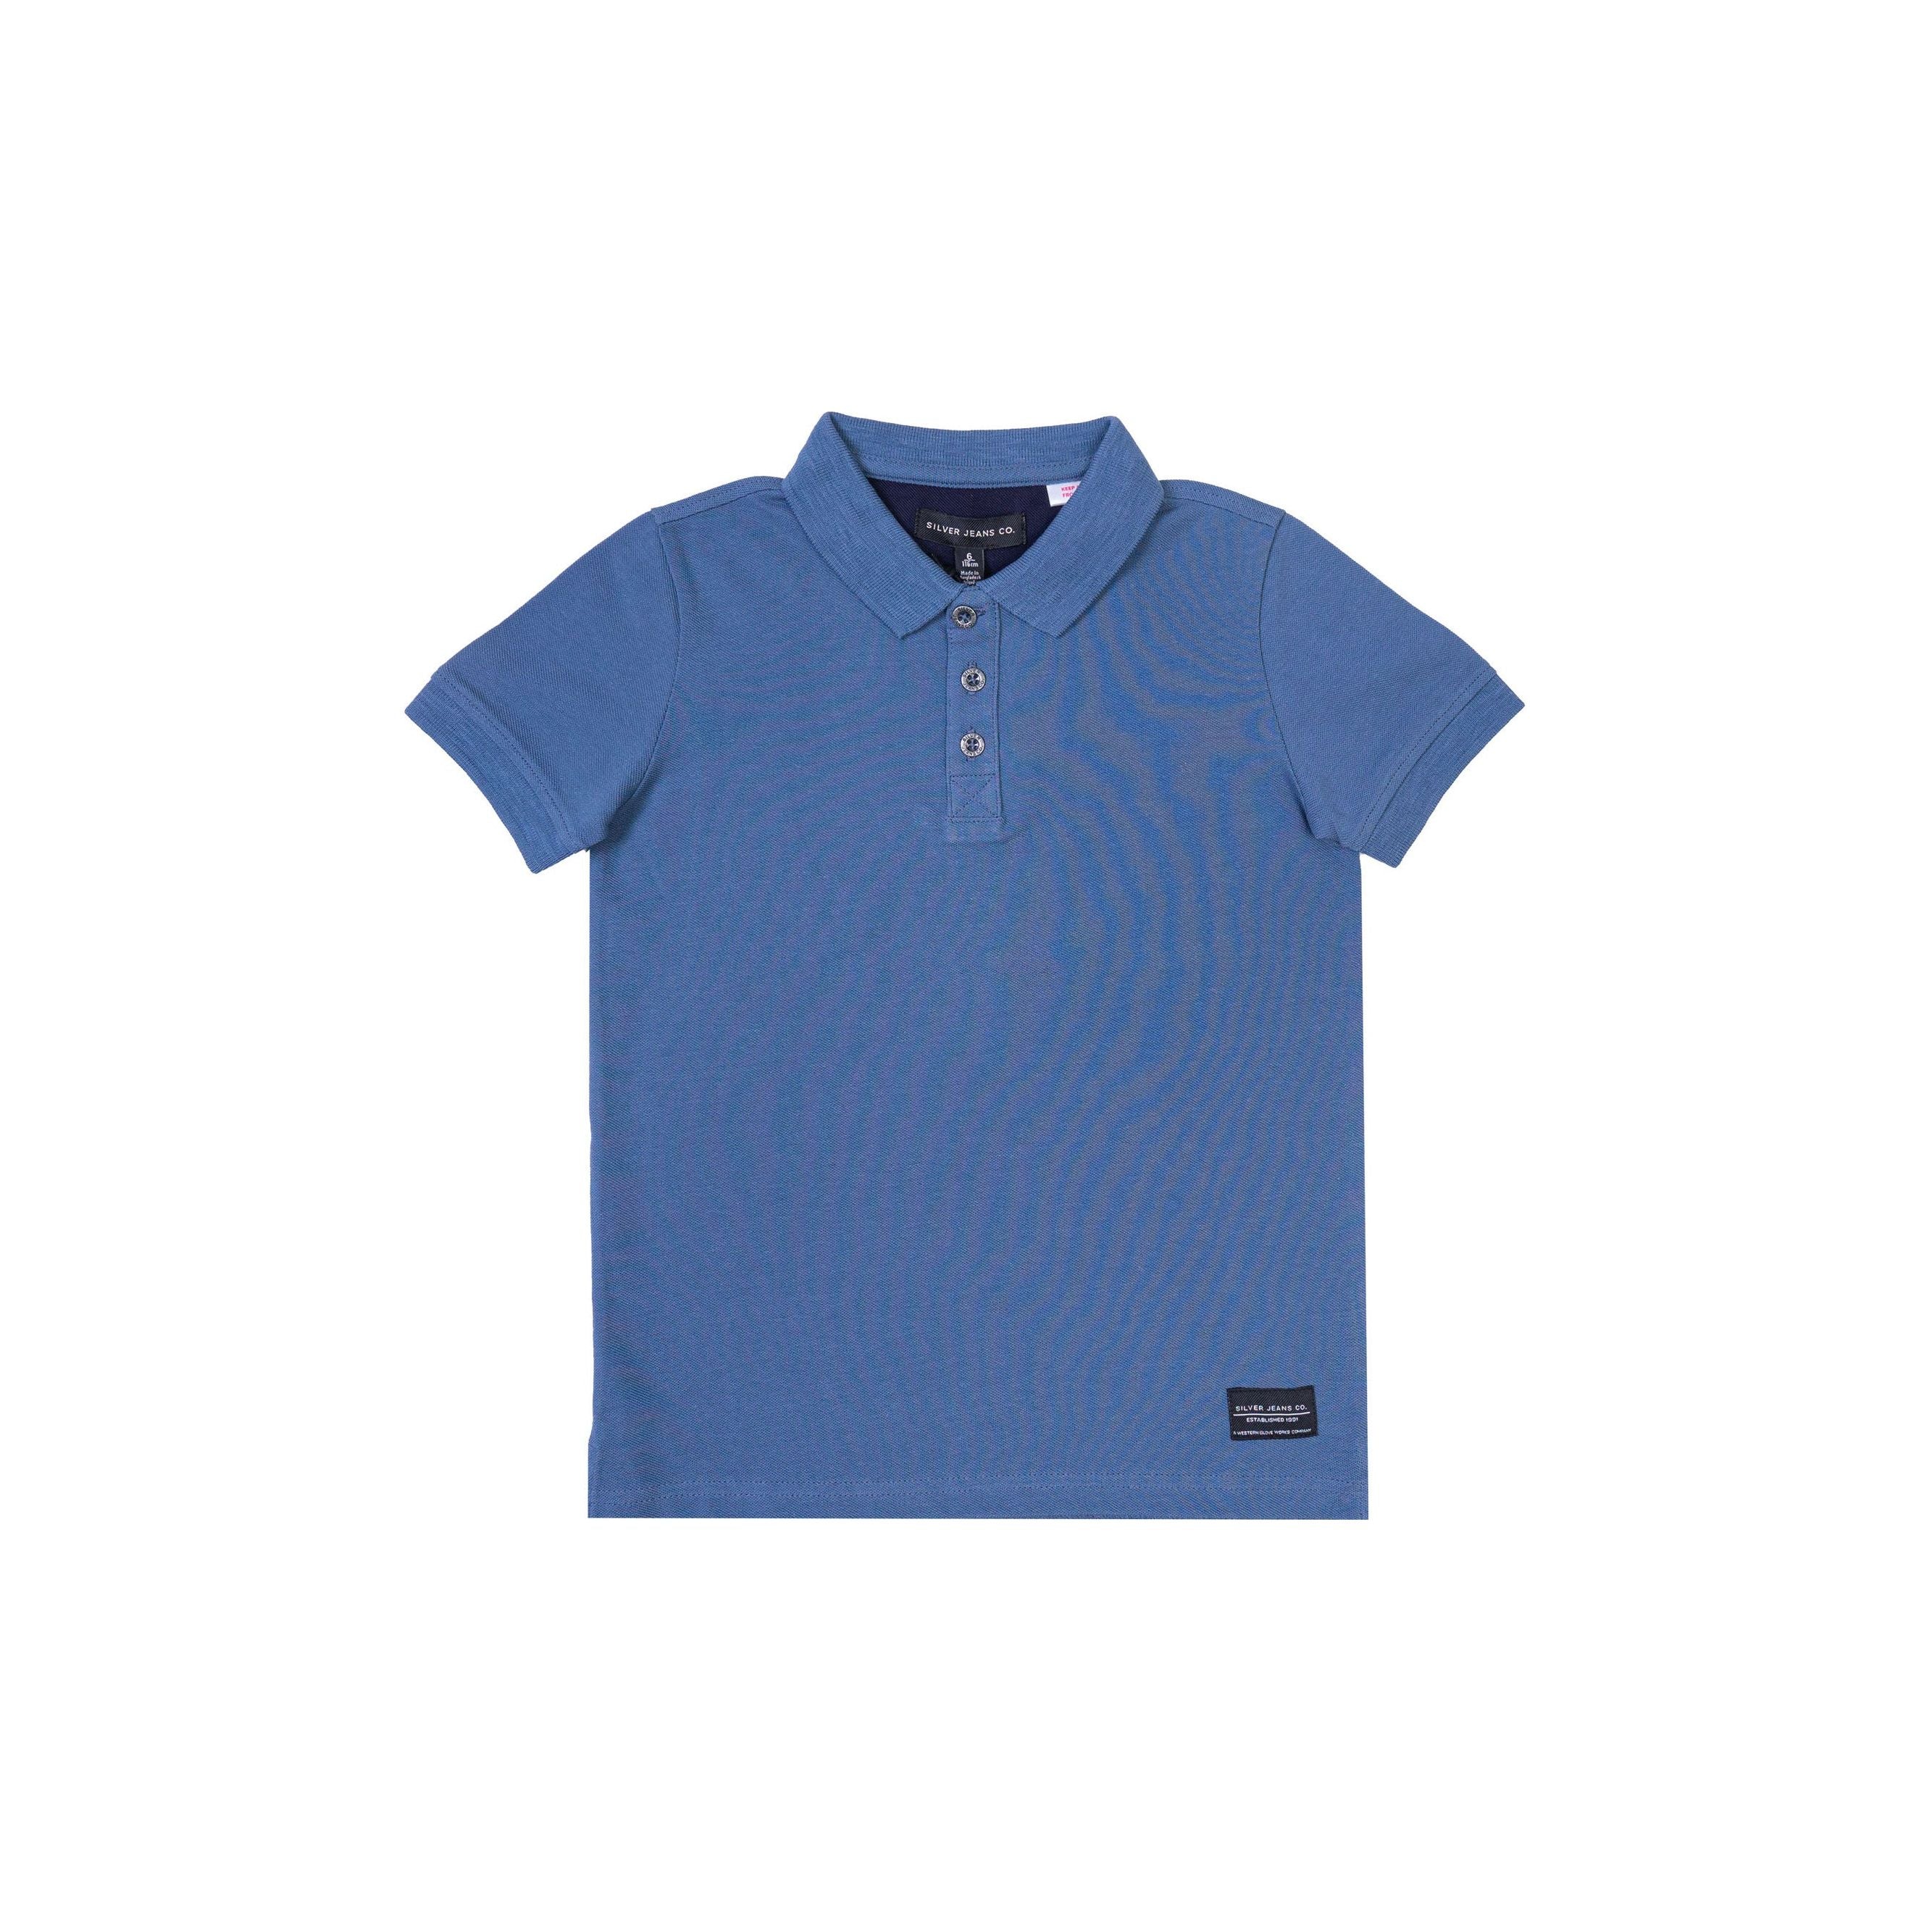 Silver Jeans - Boys Polo in Soft Blue